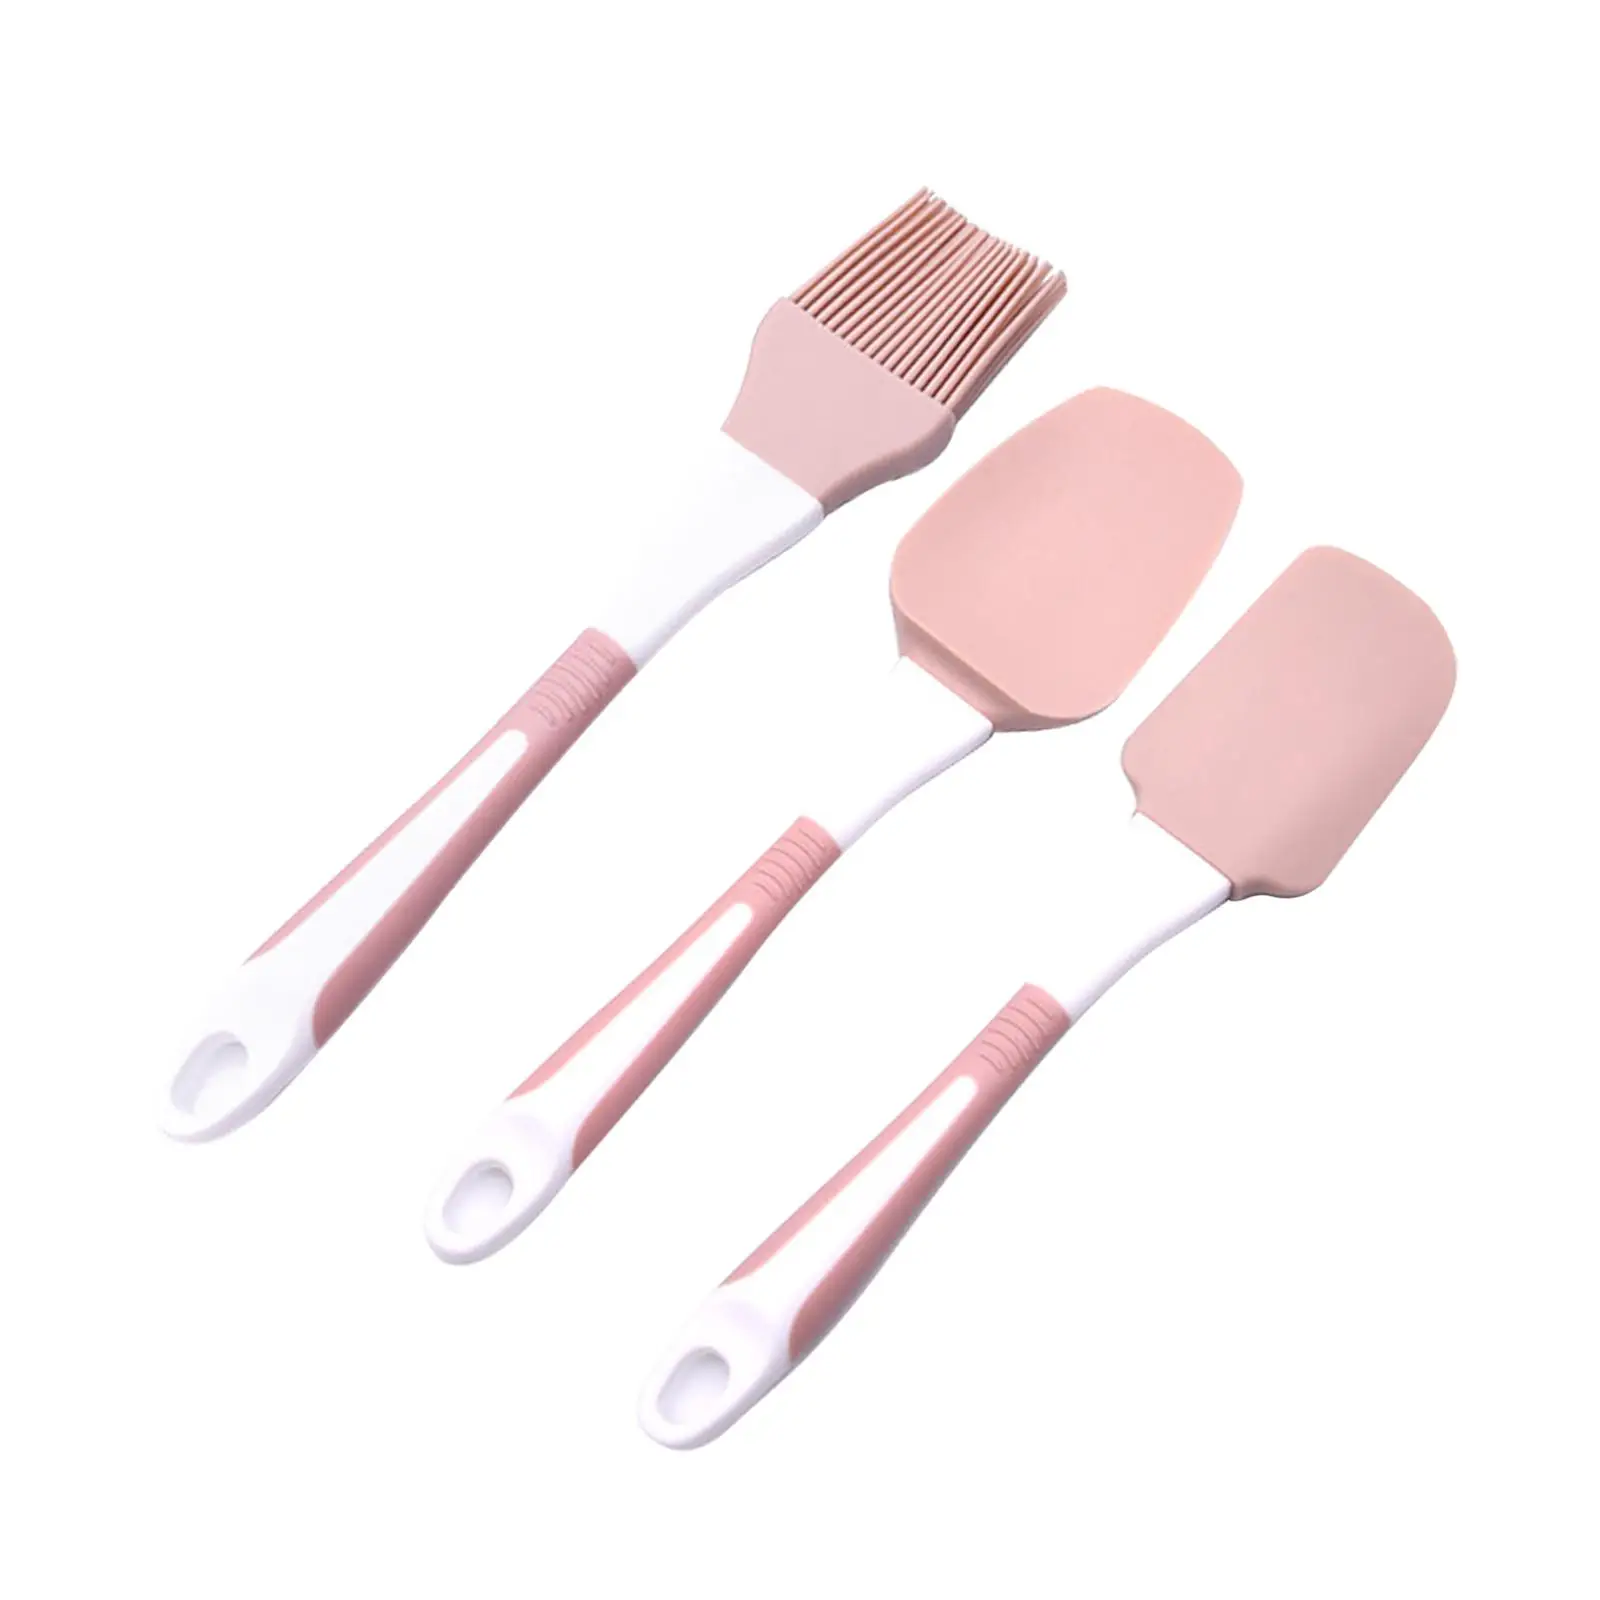 Multifunctional Silicone Baking Utensils Detachable Heat Resistant DIY Tool Non Sticky for Baking Cooking Cake Barbecue Bread